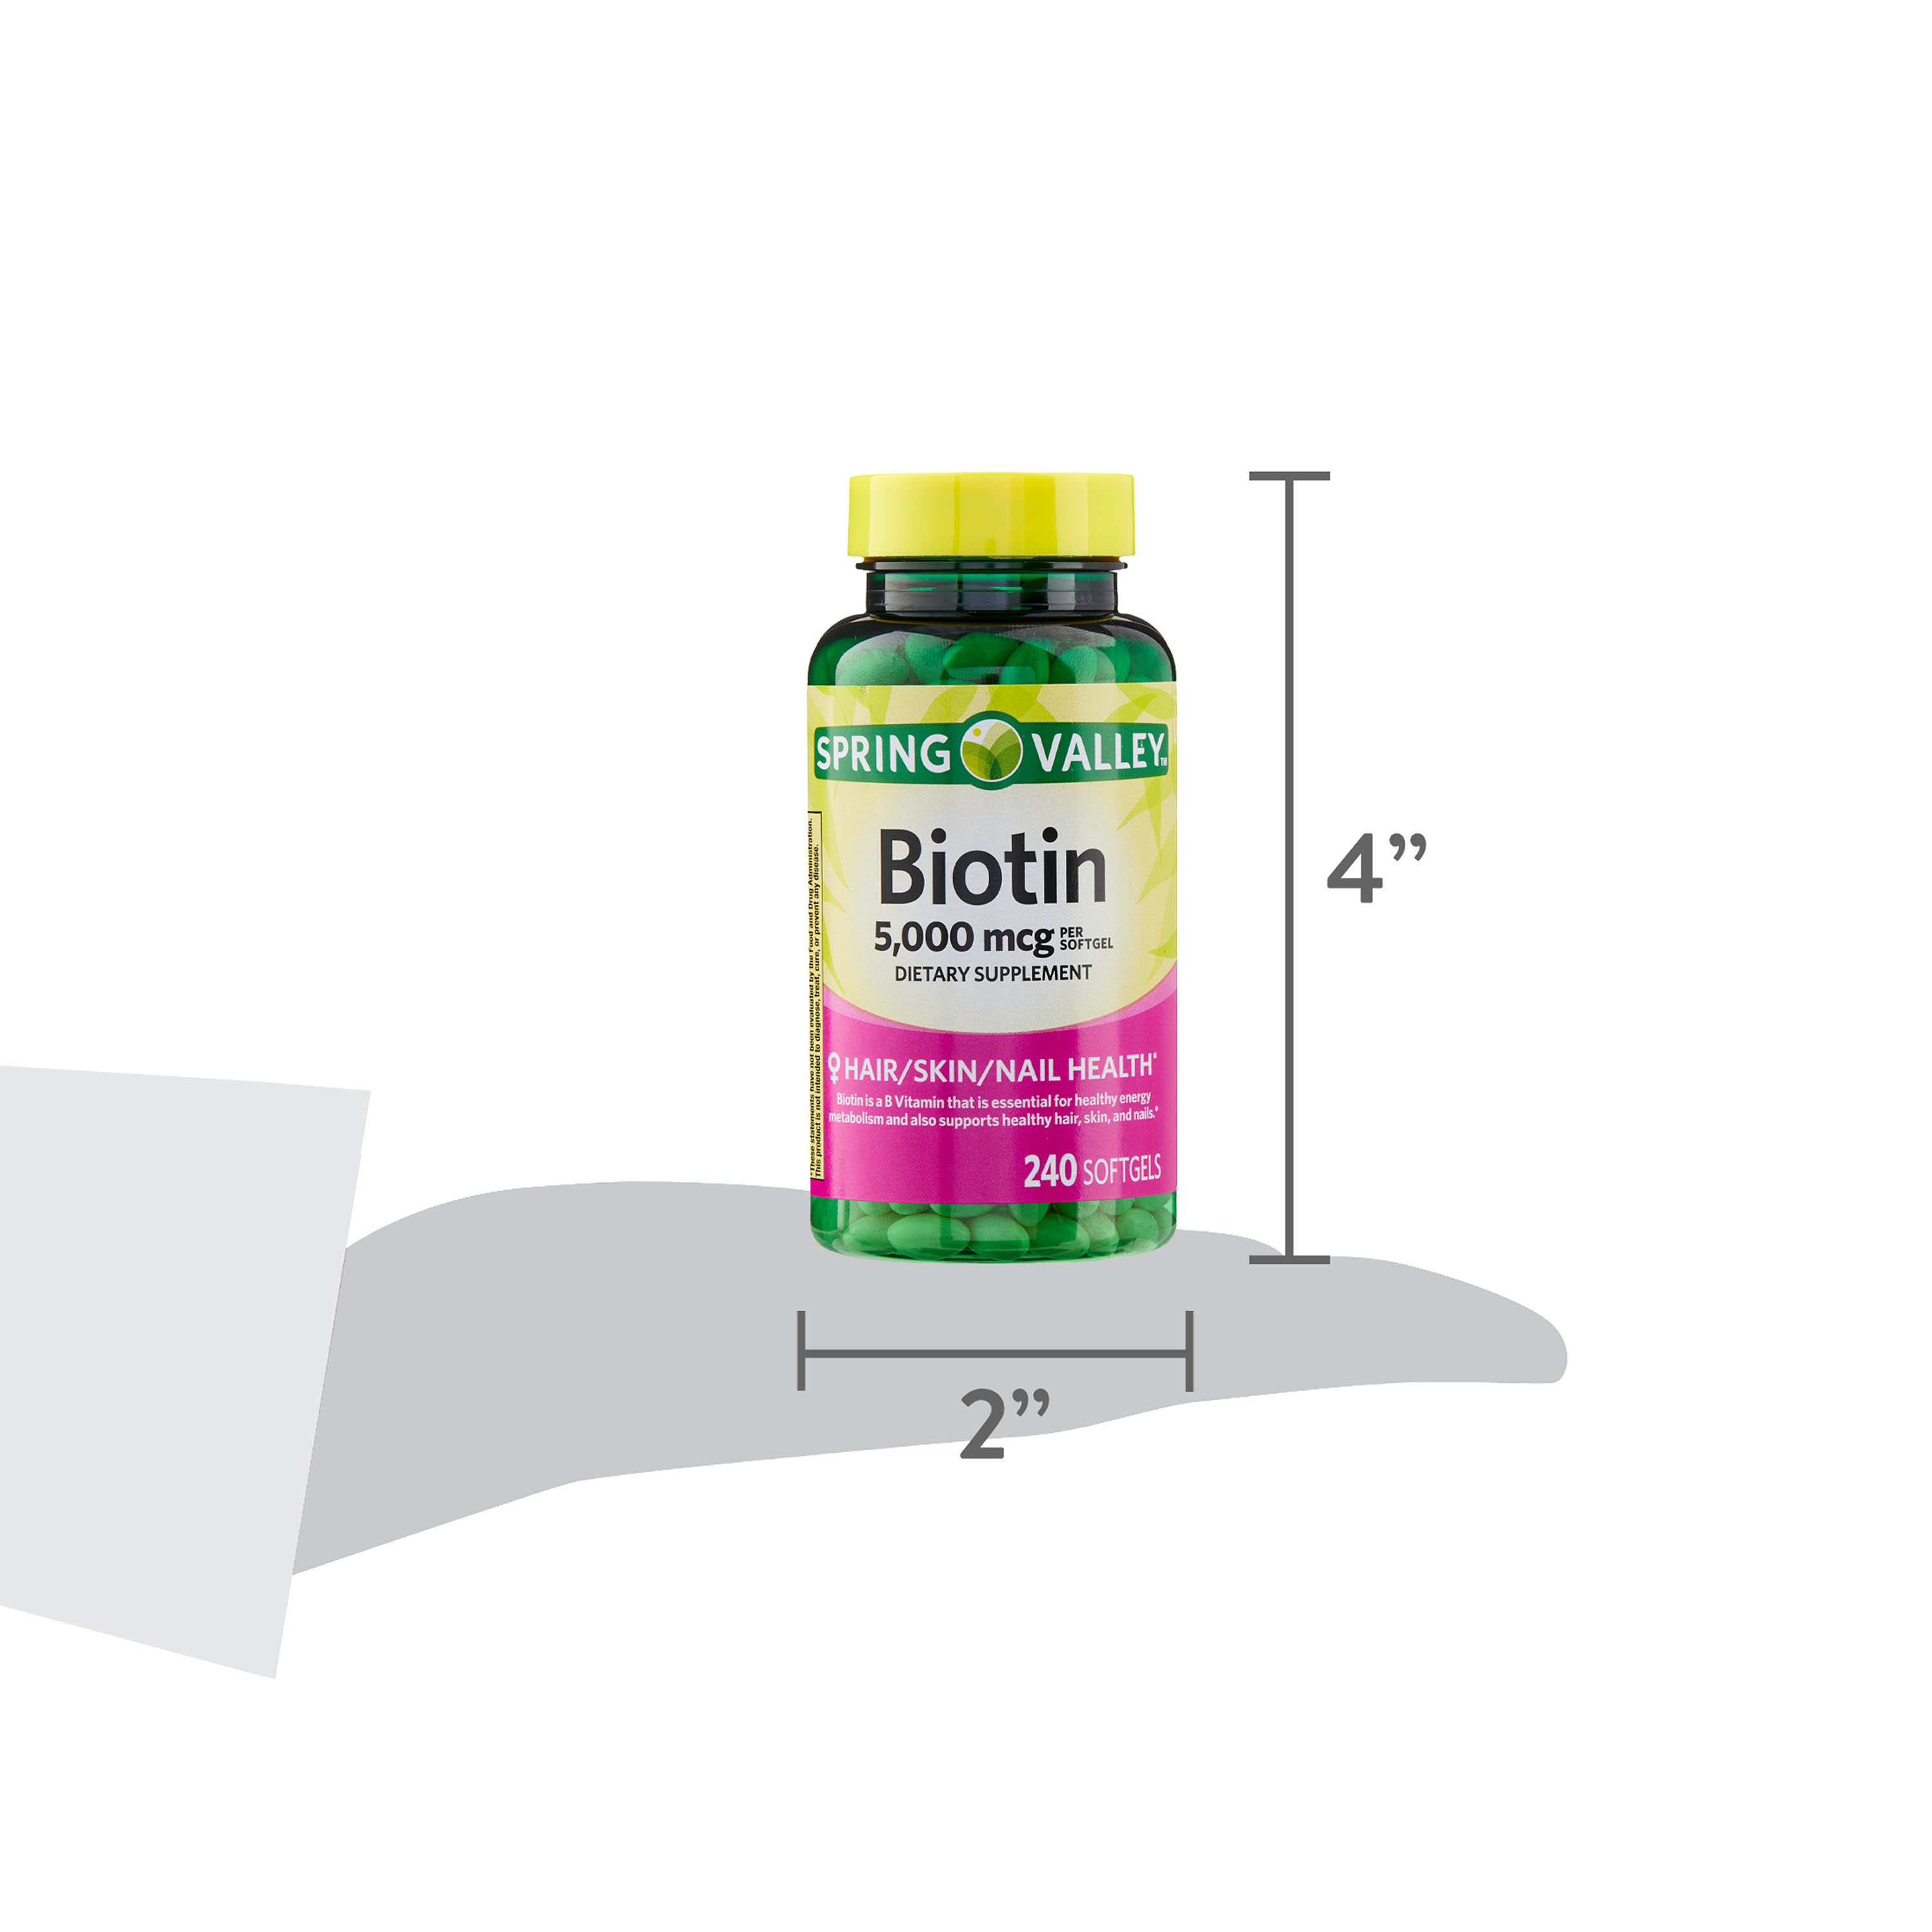 Spring Valley Biotin Softgels Dietary Supplement, 5,000 mcg, 240 Count - image 15 of 16